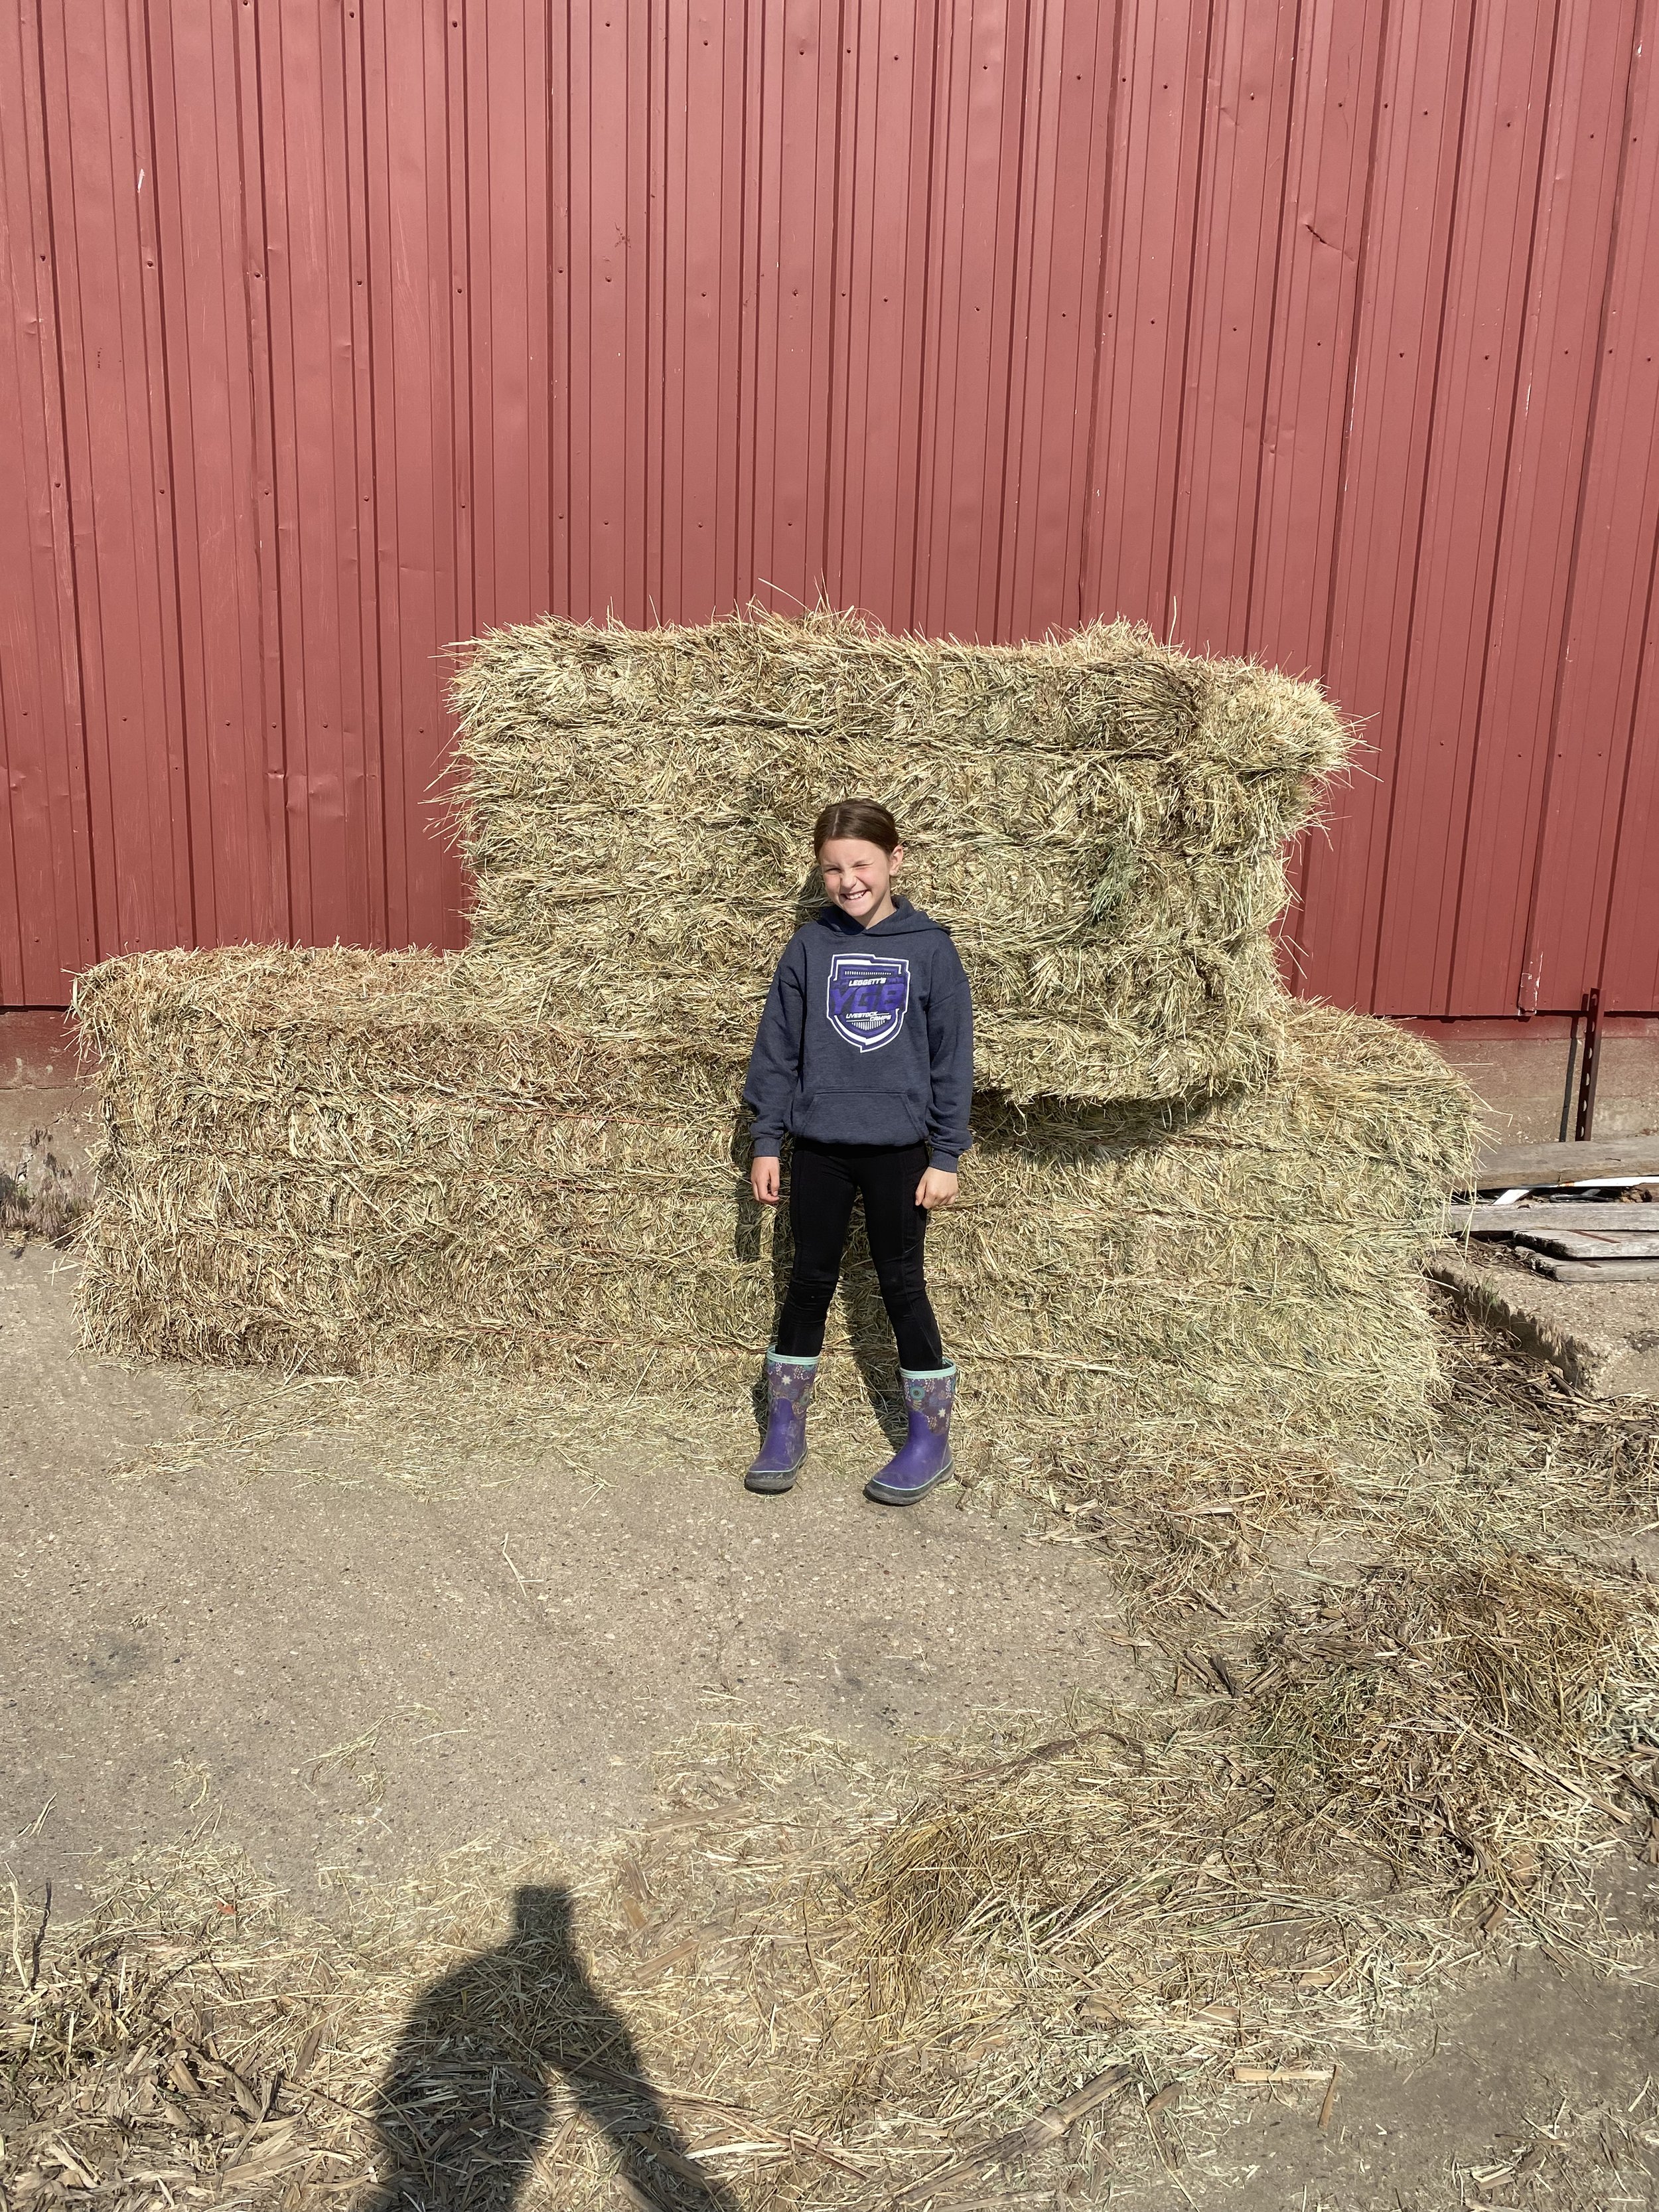 Biggest and Smallest Bale + Best Helper